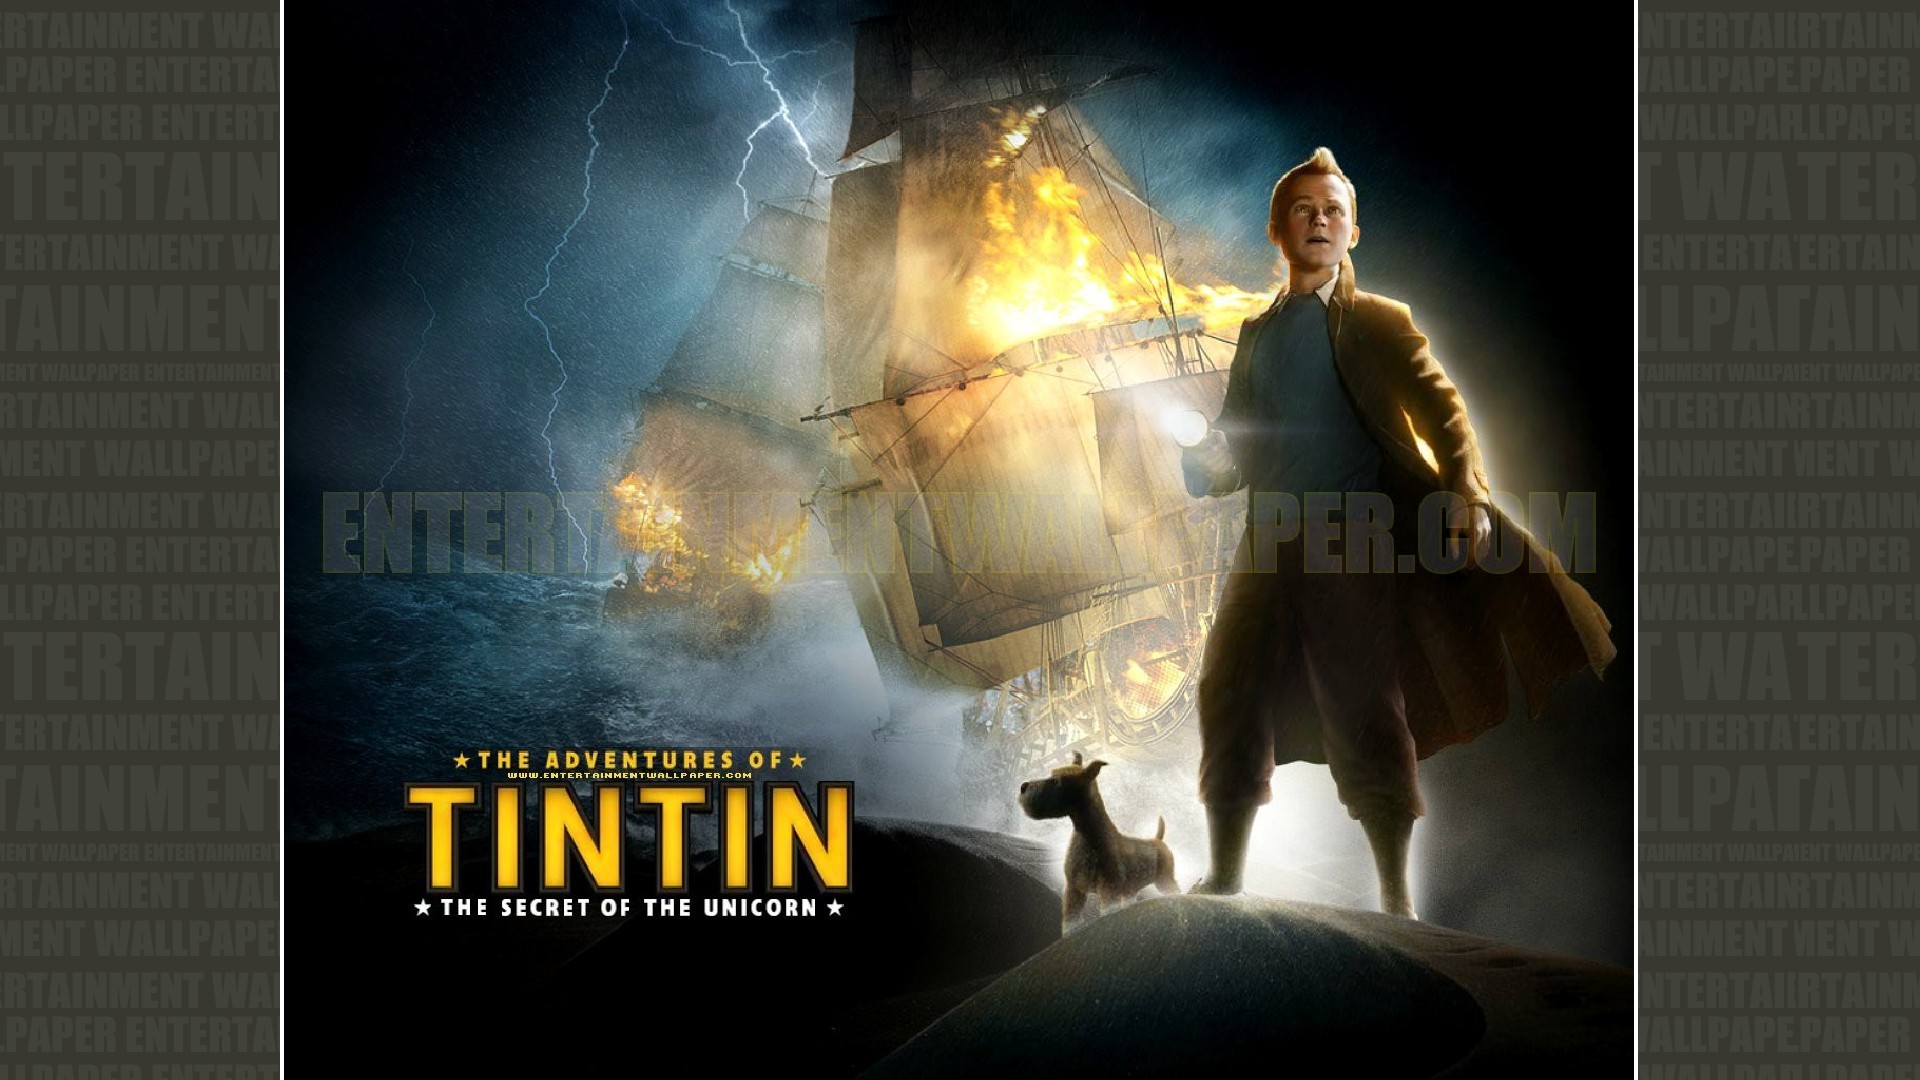 1920x1080 The Adventures of Tintin: The Secret of the Unicorn Wallpaper - Original  size, download